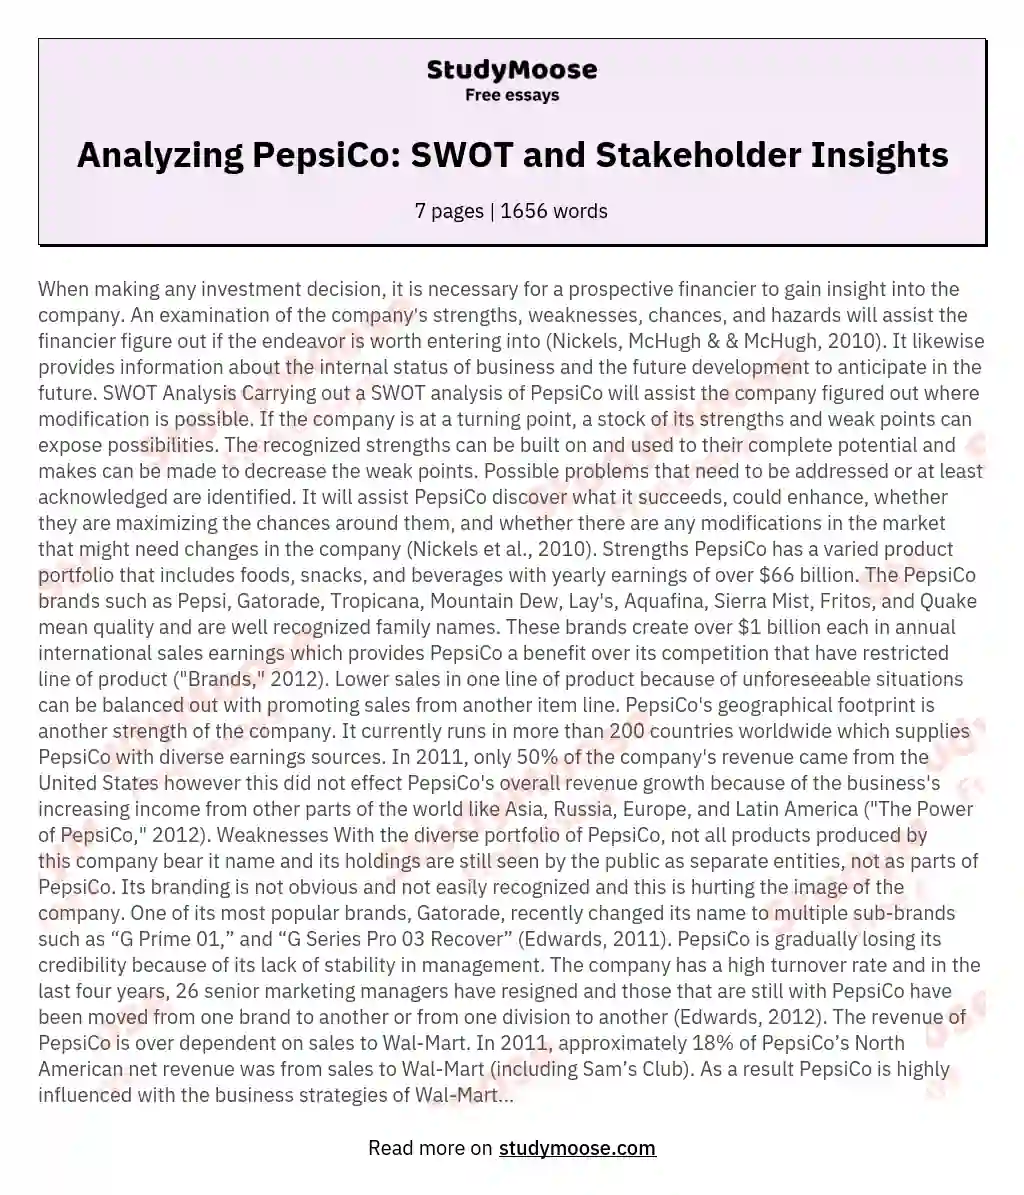 Analyzing PepsiCo: SWOT and Stakeholder Insights essay